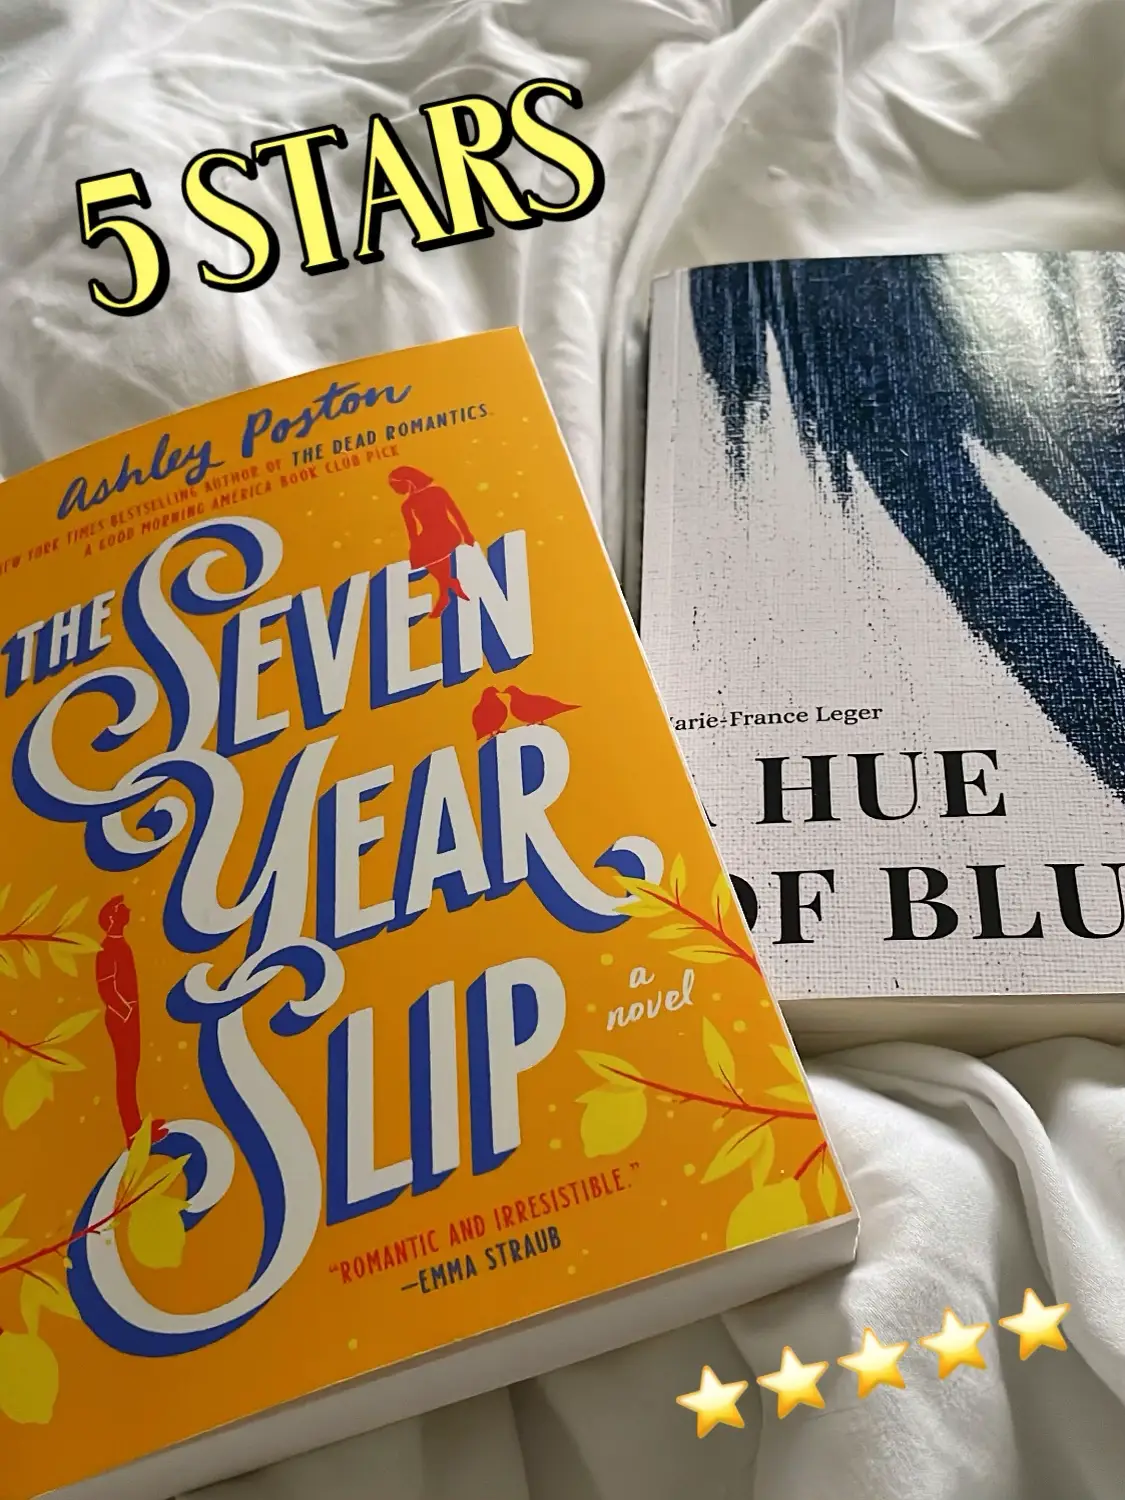 2023 Must-Read: The Seven Year Slip by Ashley Poston